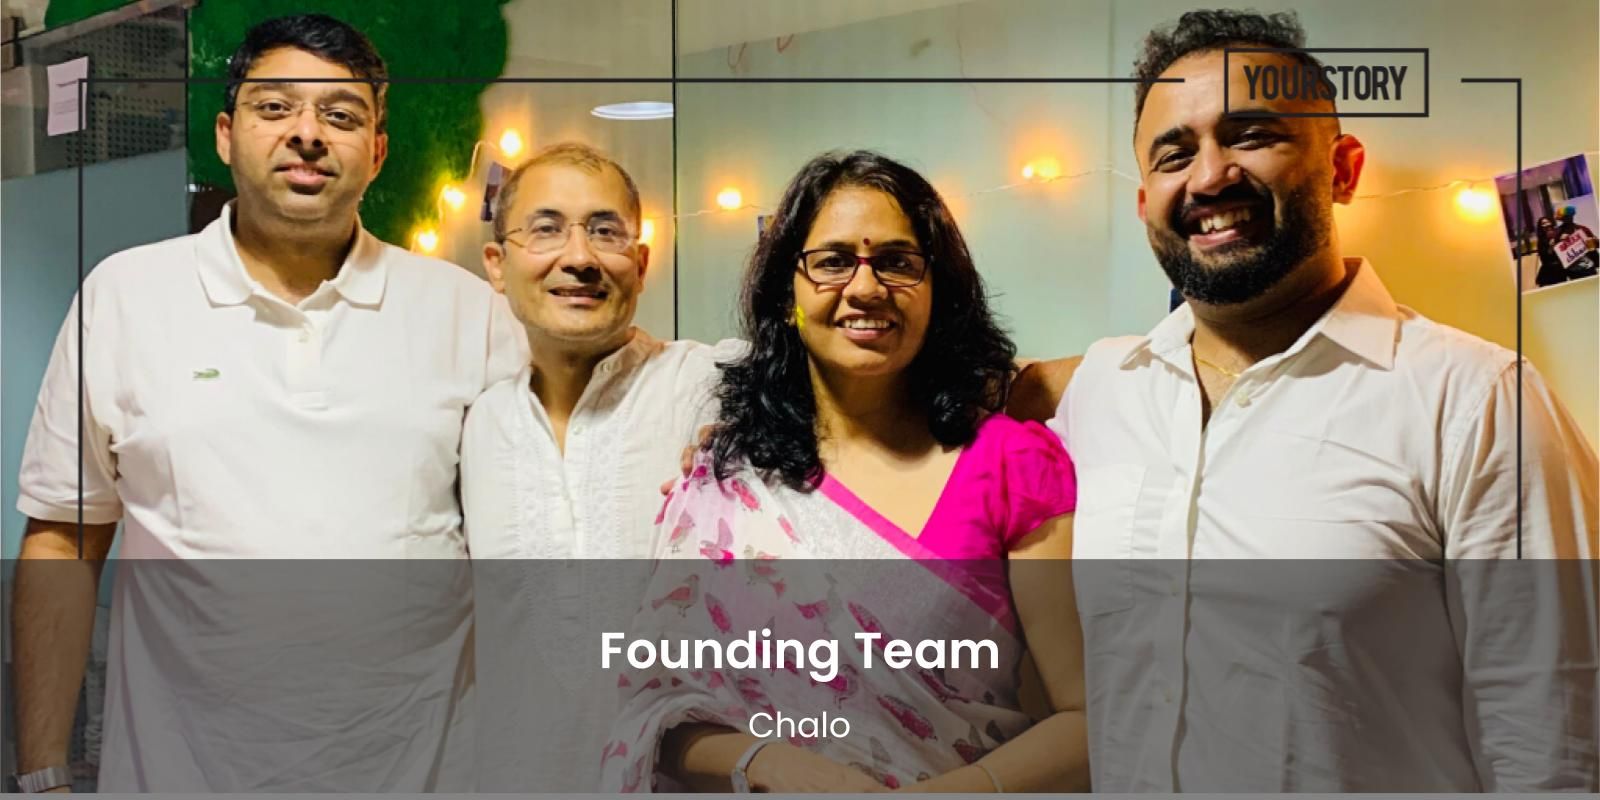 Chalo raises $45M in equity, $12M in debt